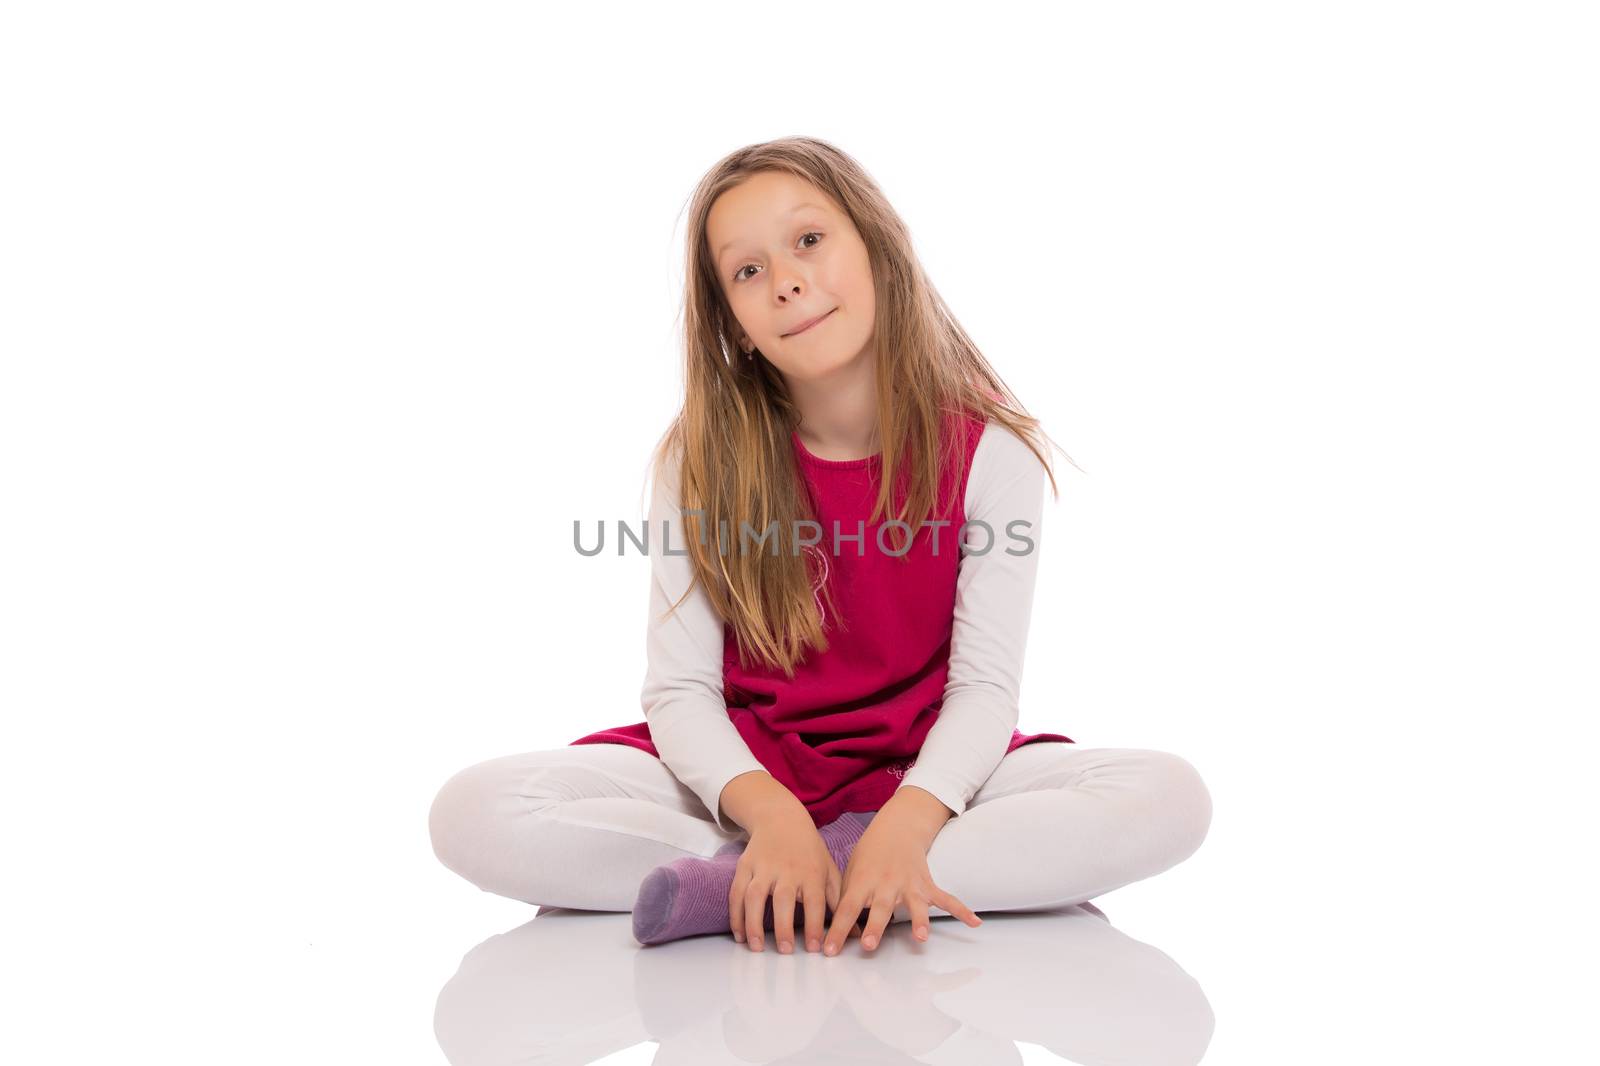 Portrait of a young girl with long hair sitting with crossed legs on the floor and making faces. Isolated on white background.